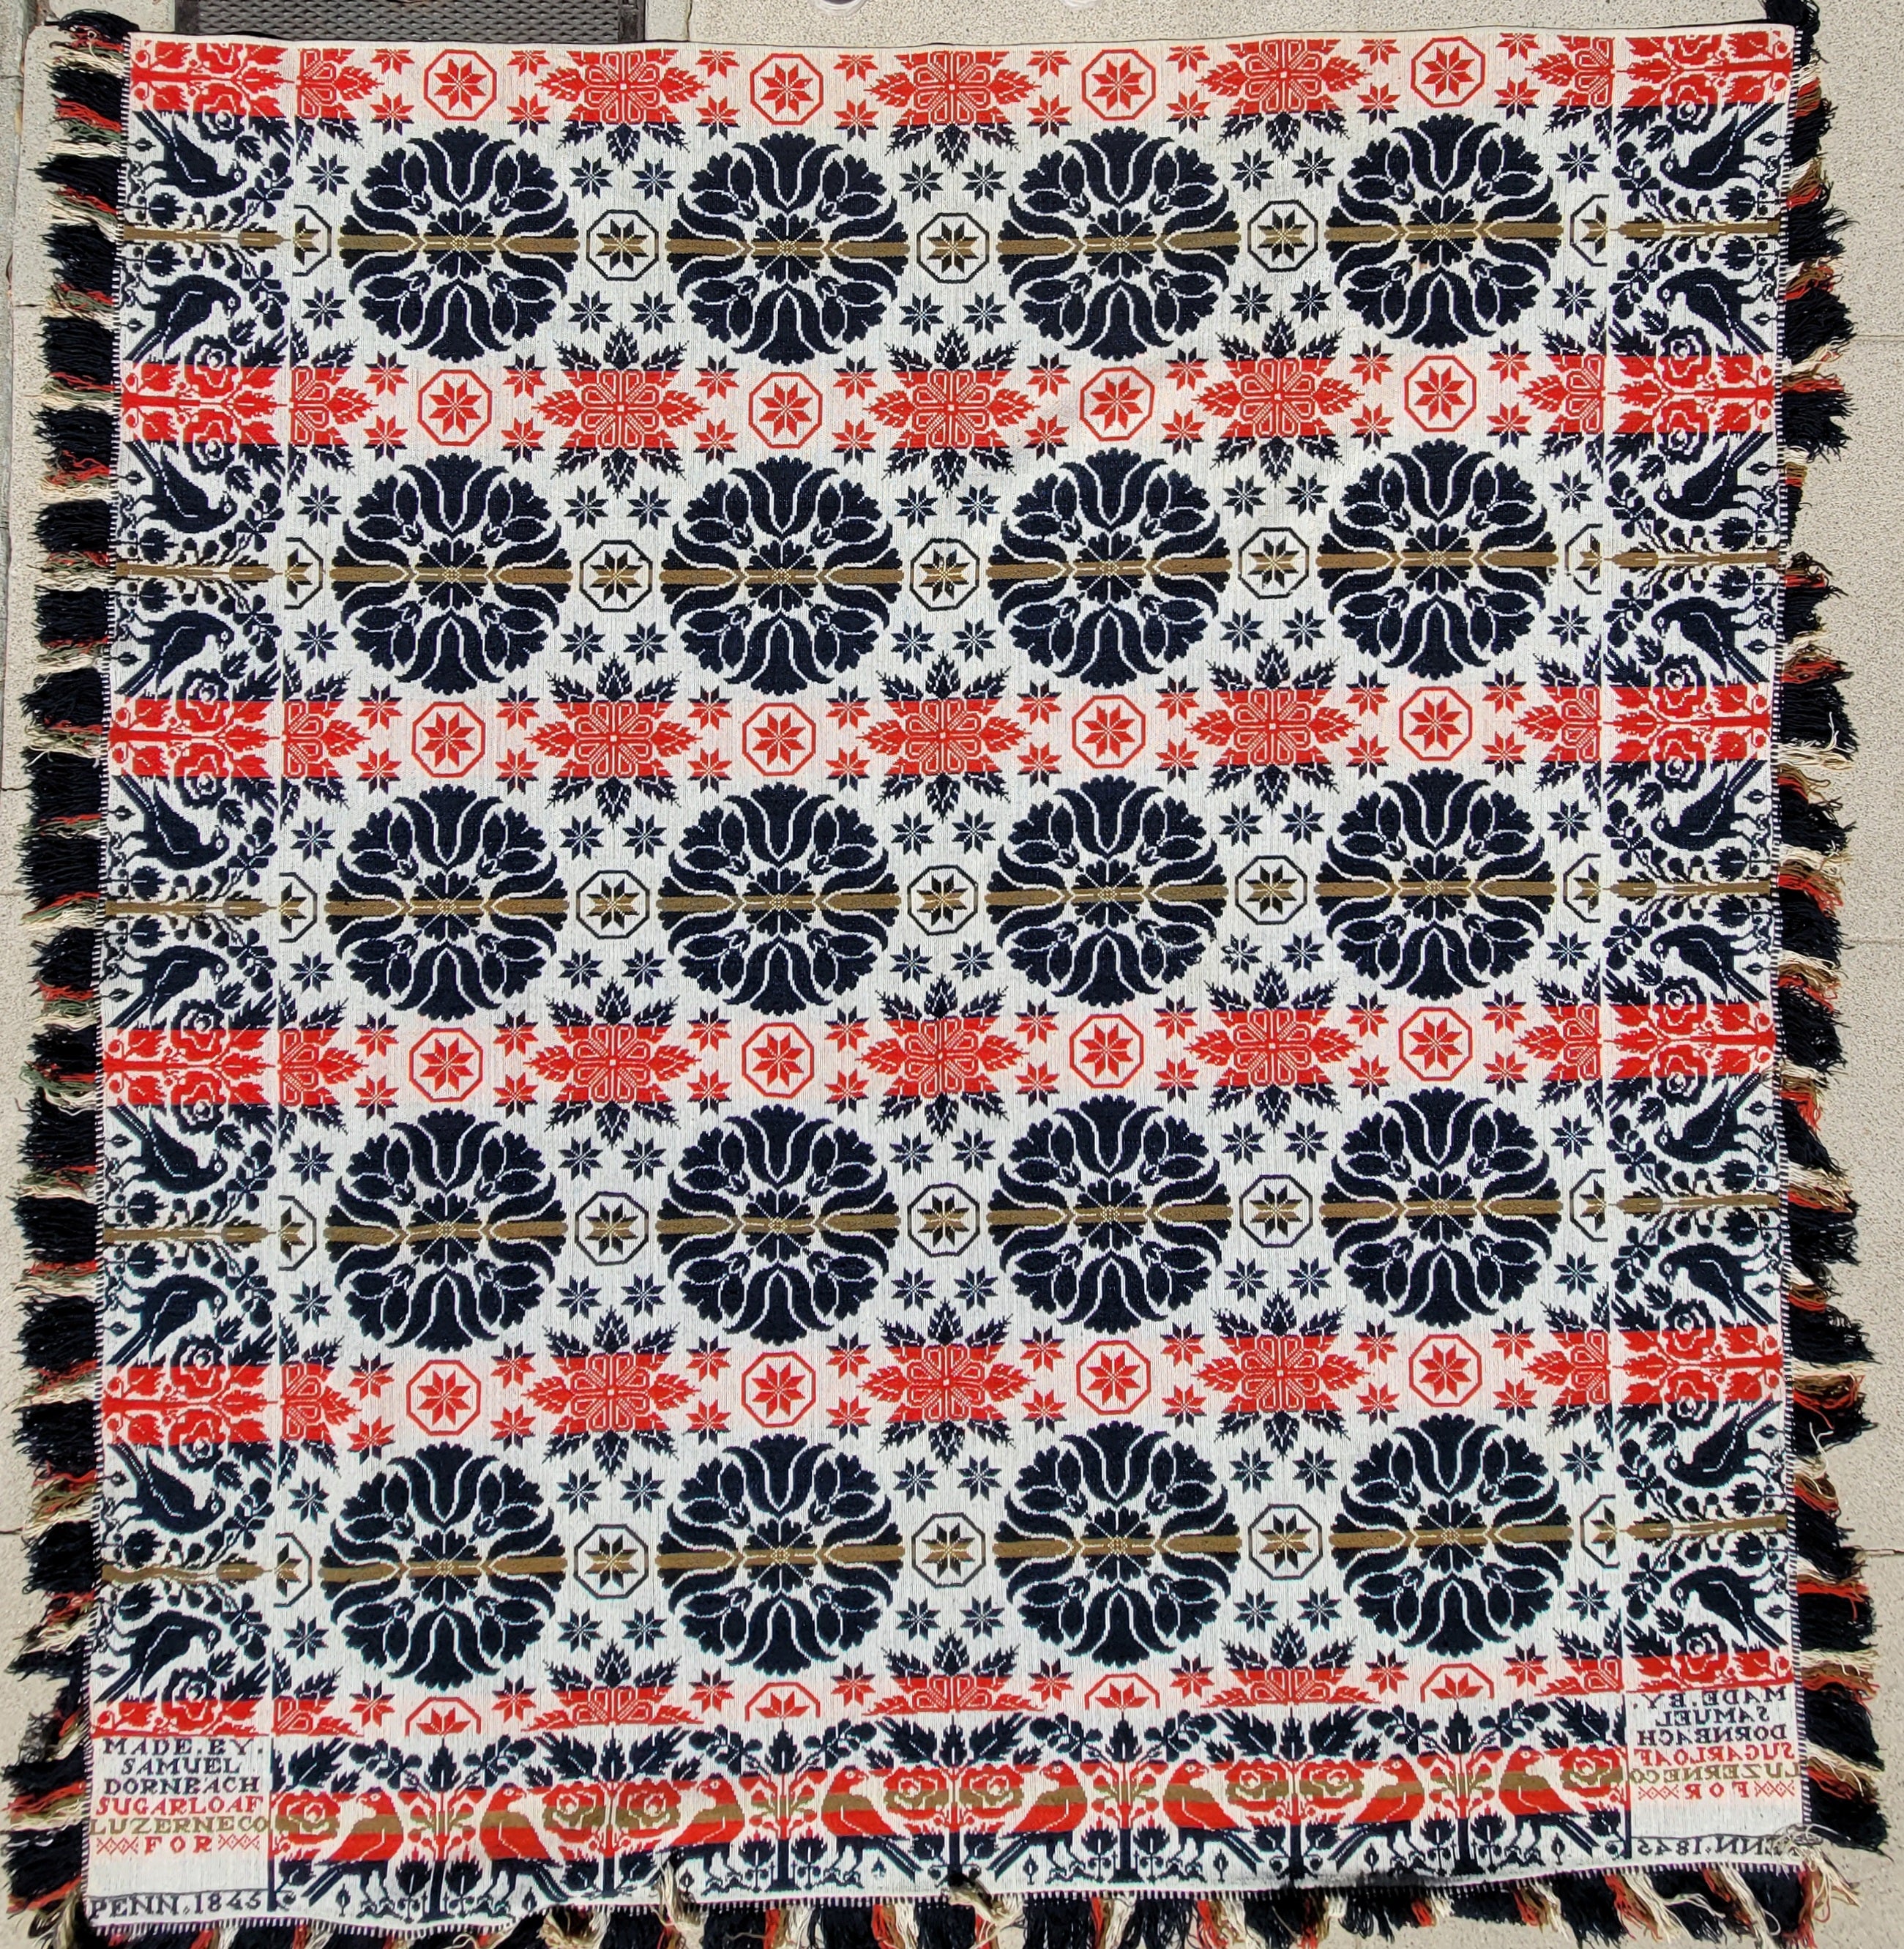 Signed and dated :
Made By Samuel Dornbach Sugarloaf County,Pennsylvania 1845 coverlet hand woven and in fine condition.The fringe is full length and unworn.